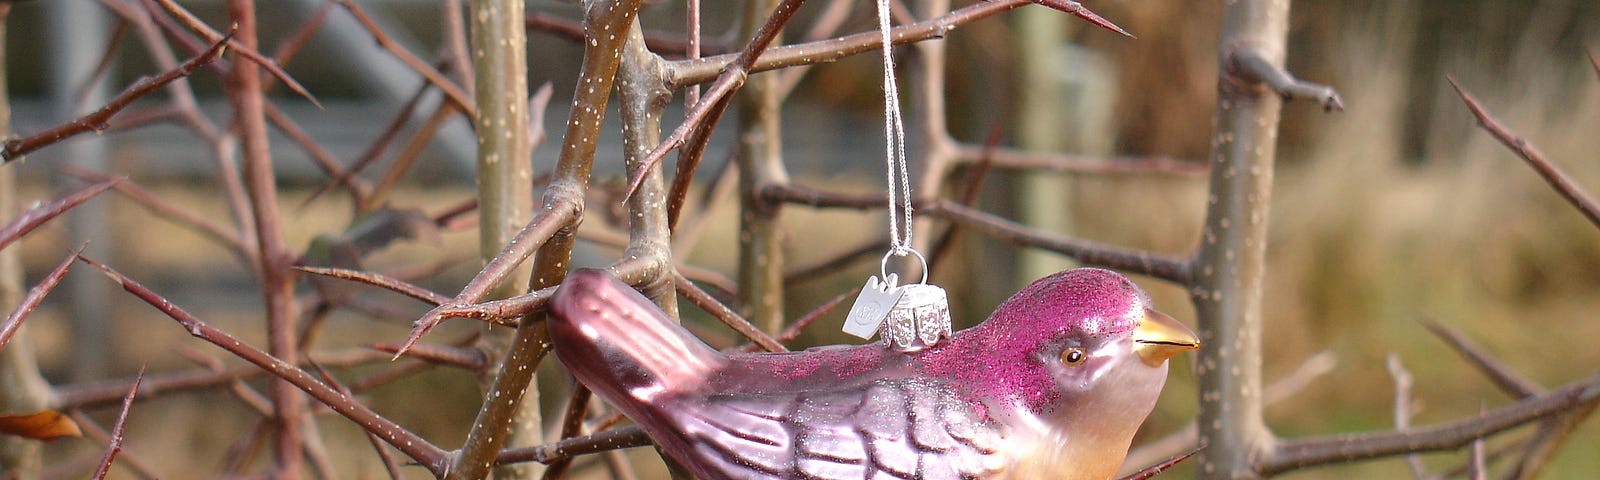 A glass christmas ornament shaped like a pink and gold bird, hanging on a bare crabapple tree.